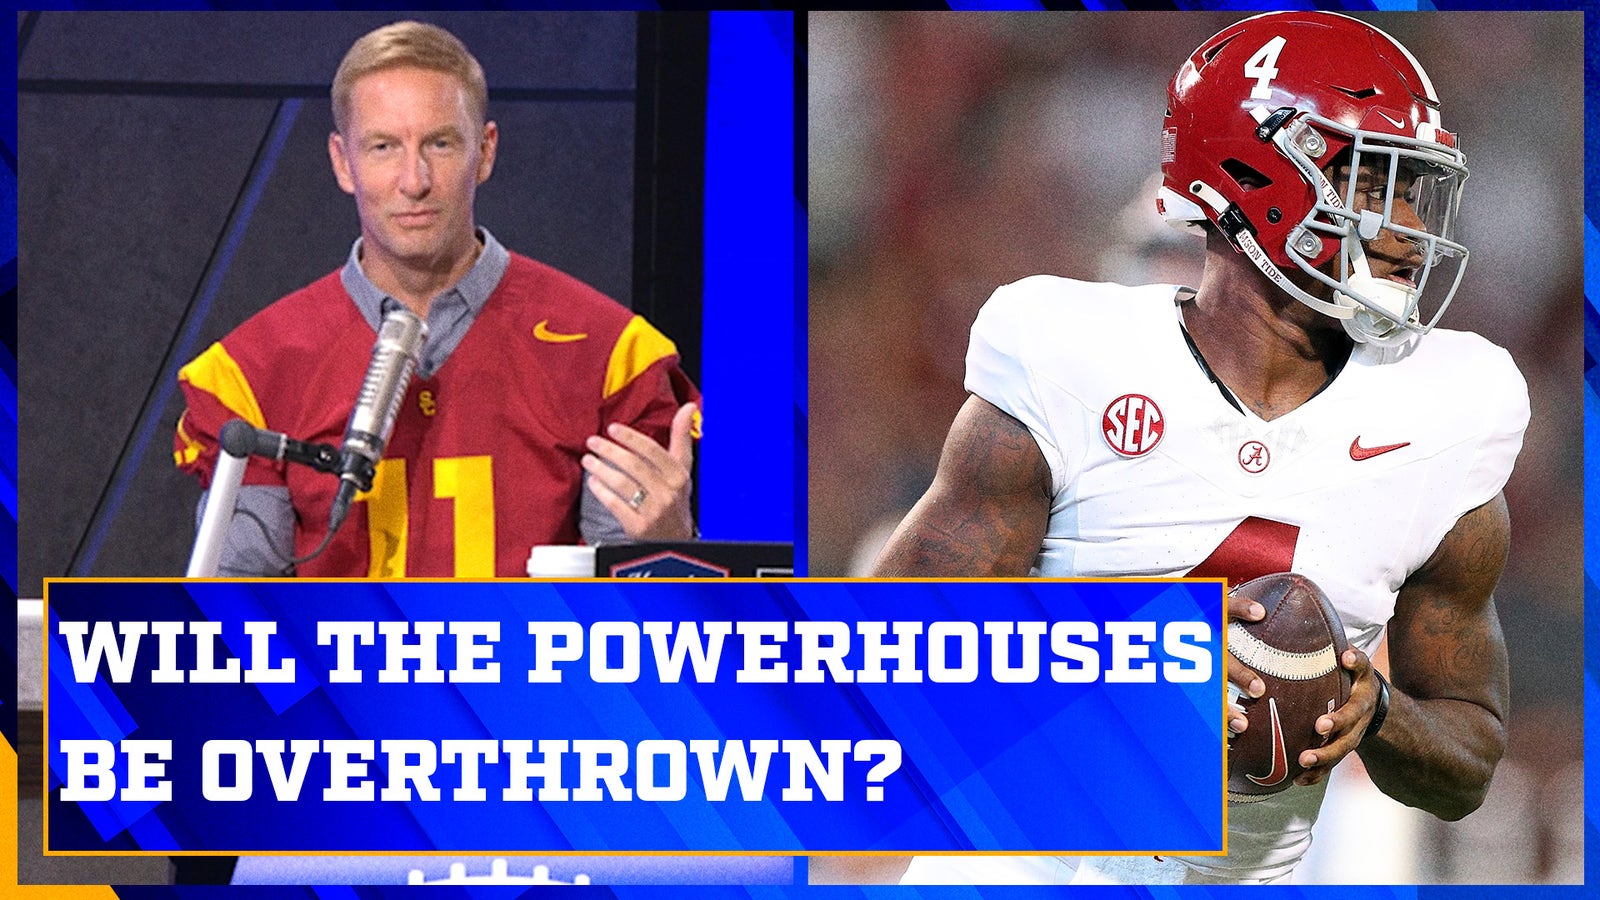 Will the SEC powerhouses be toppled?